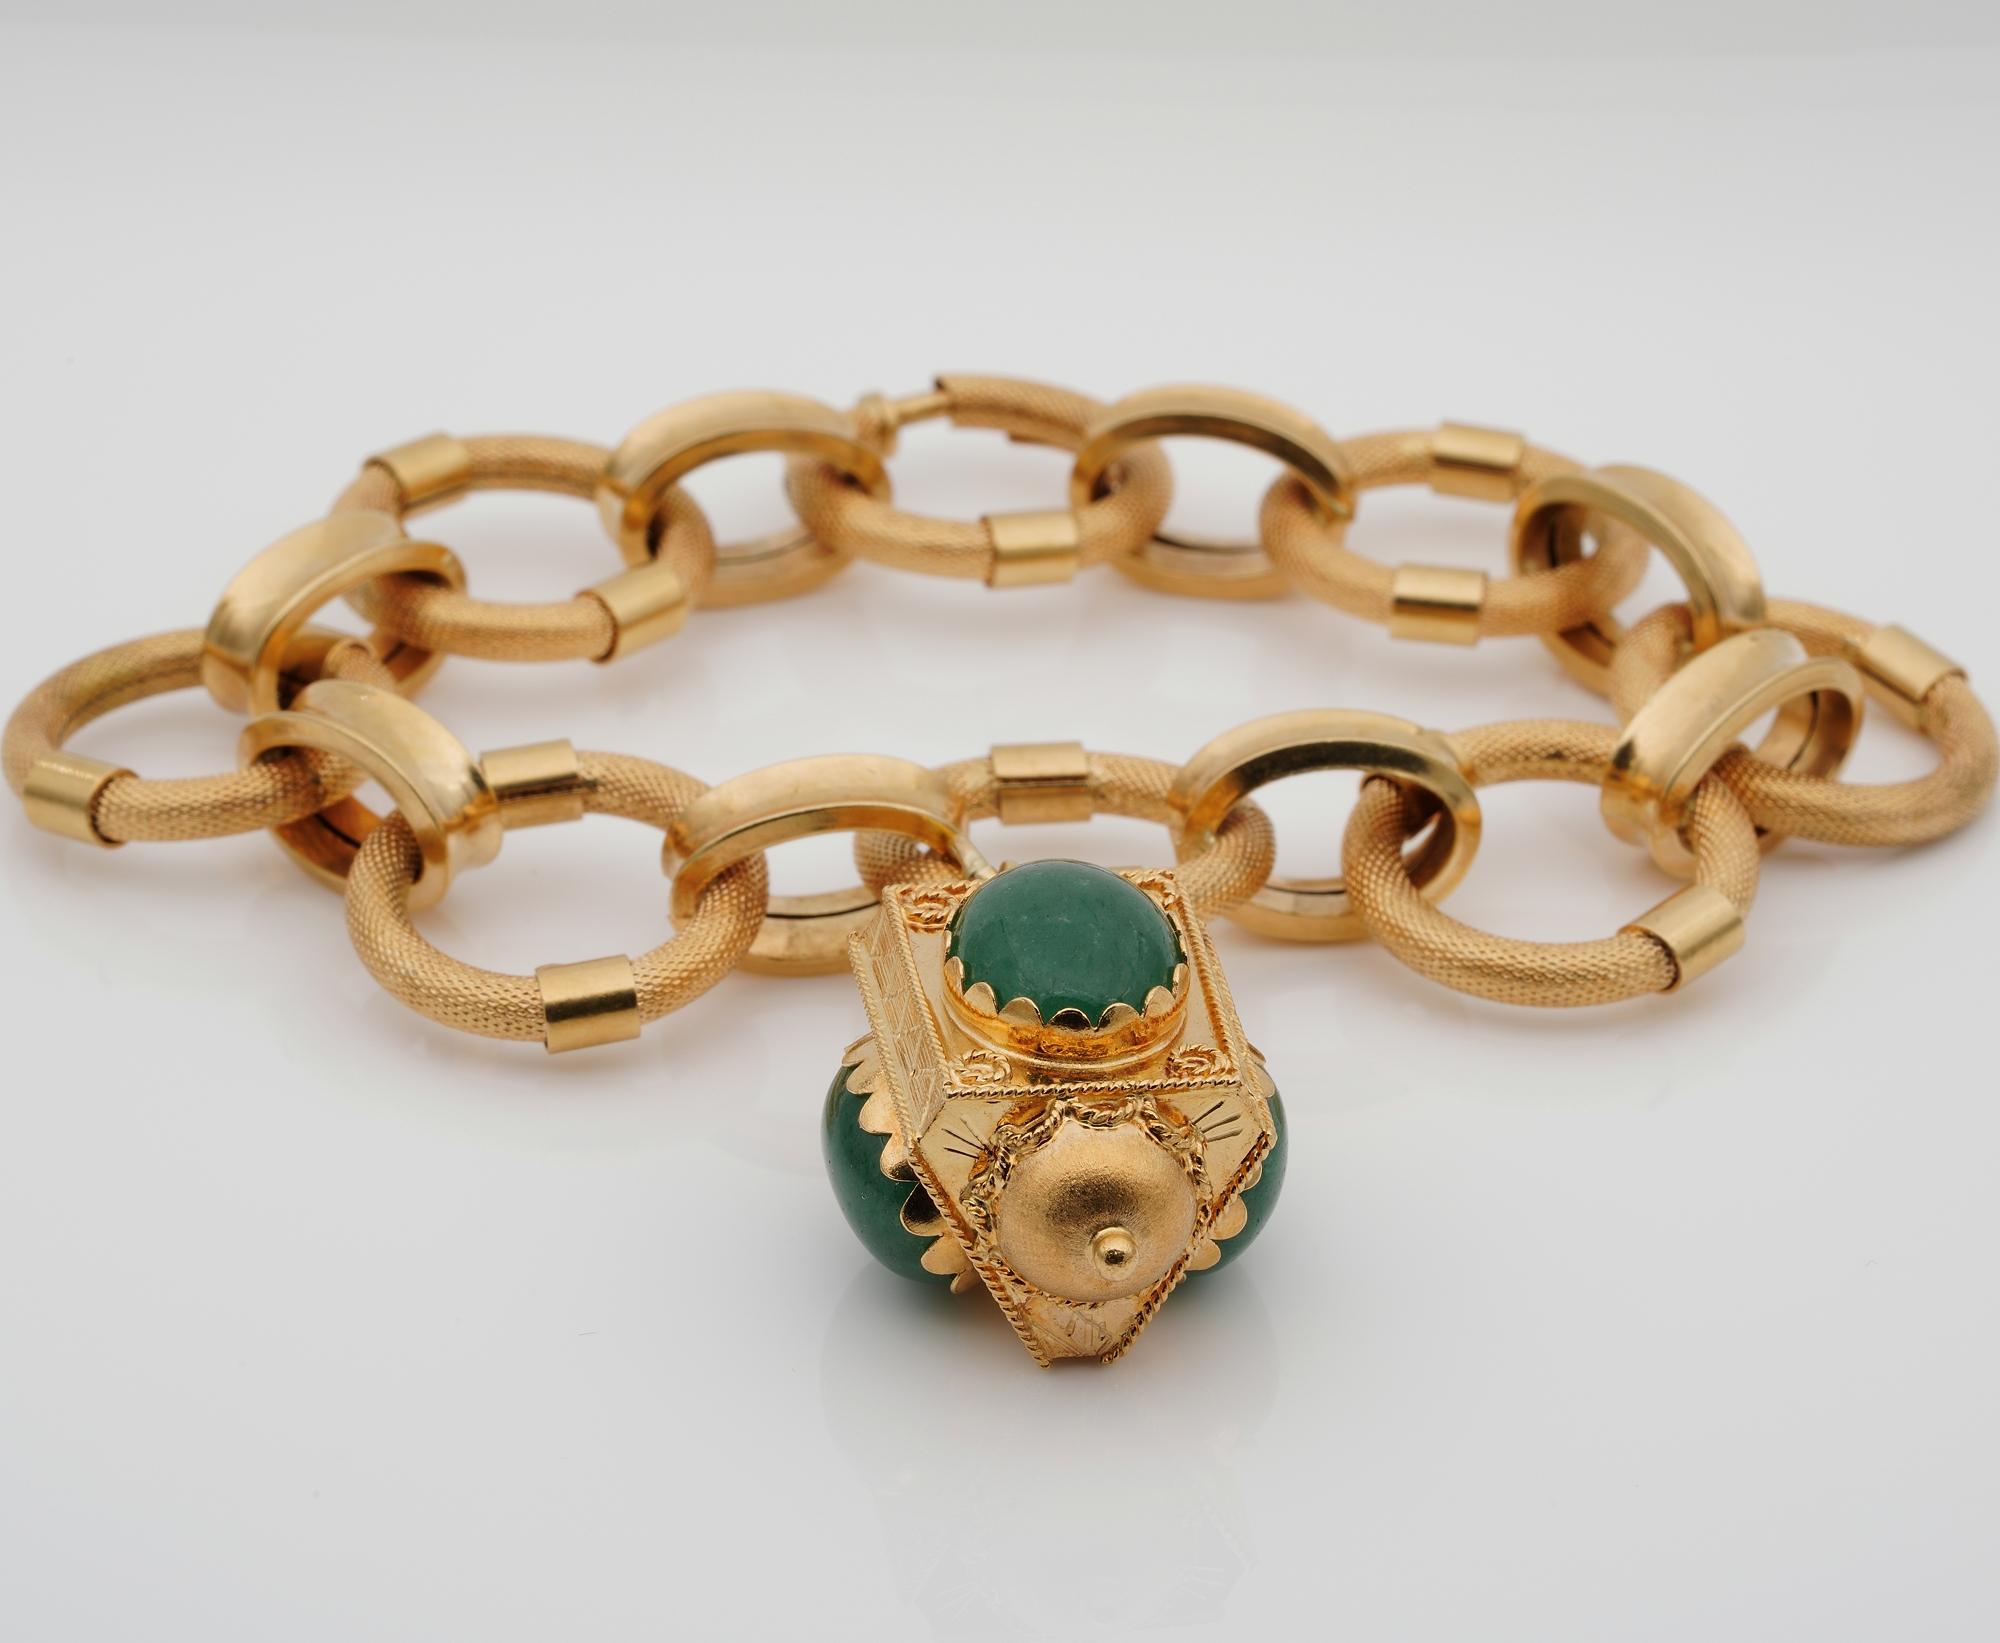 This superb example of Retro Etruscan revival Fob bracelet is of solid 18 KT gold
Boasting magnificent past workmanship and the style in vogue during La Bella Vita 1950 ca.
Designed with intertwined gold links alternating plain and snake skin